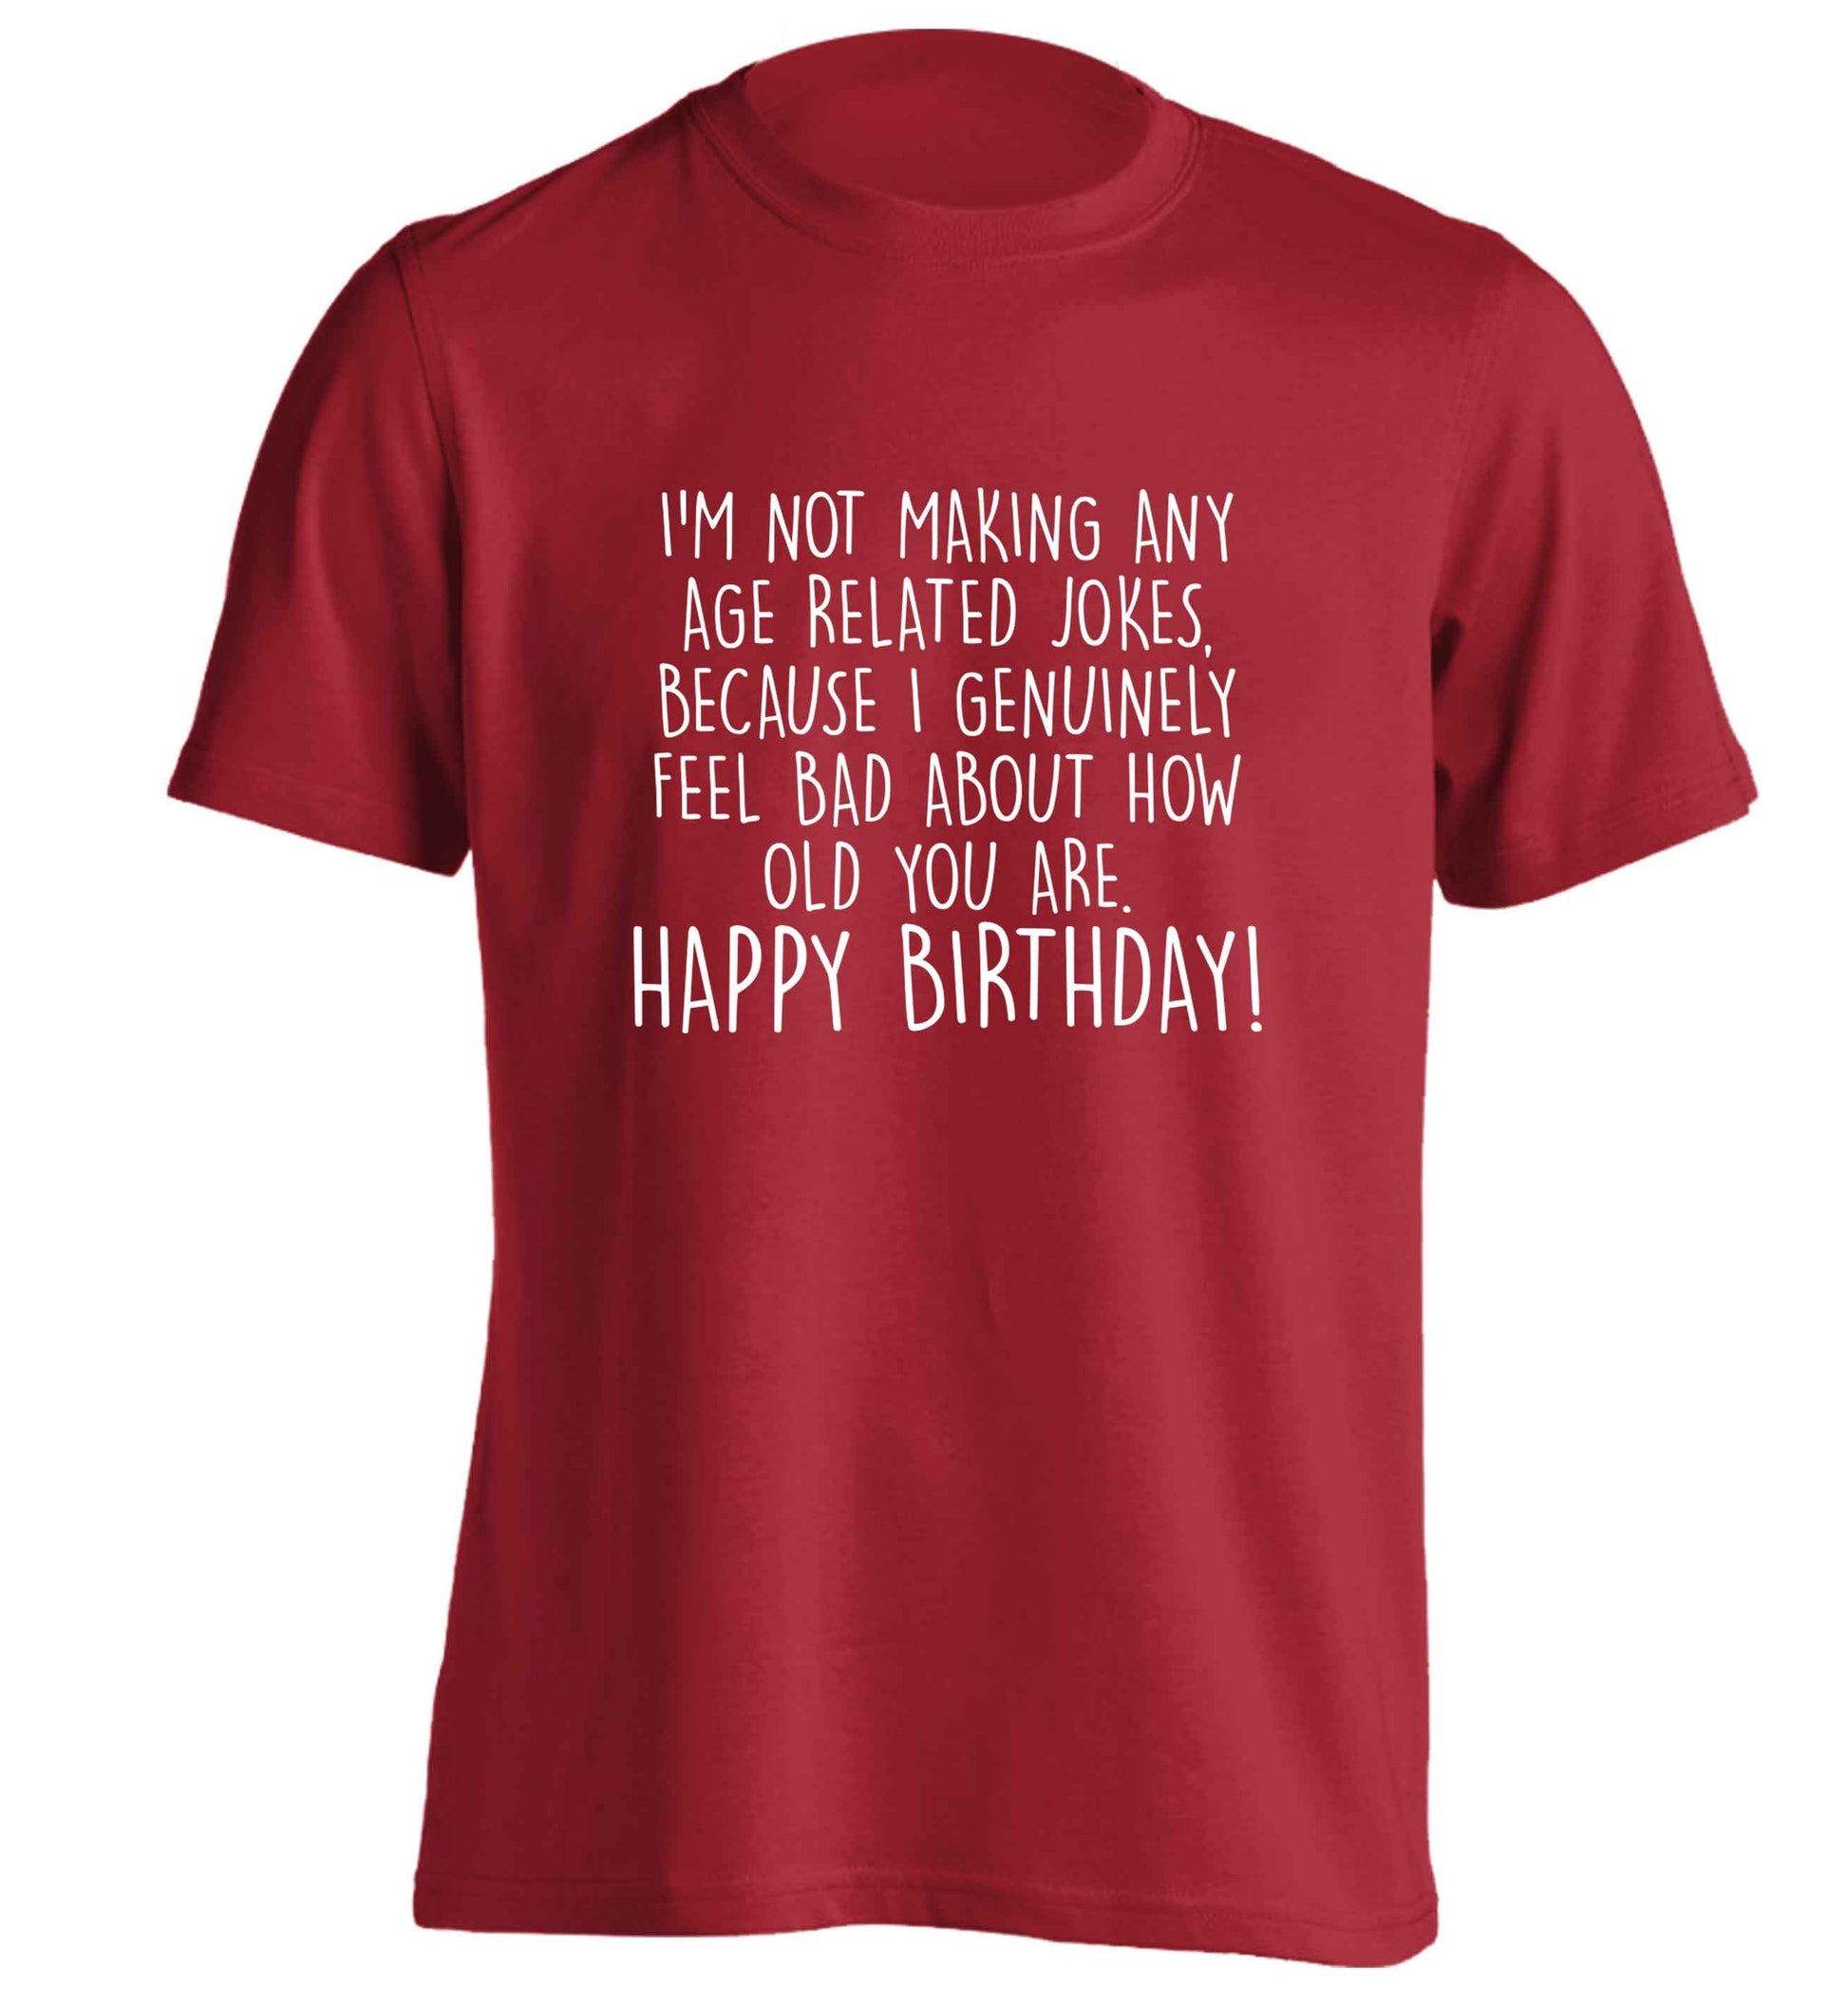 I'm not making any age related jokes because I genuinely feel bad for how old you are adults unisex red Tshirt 2XL